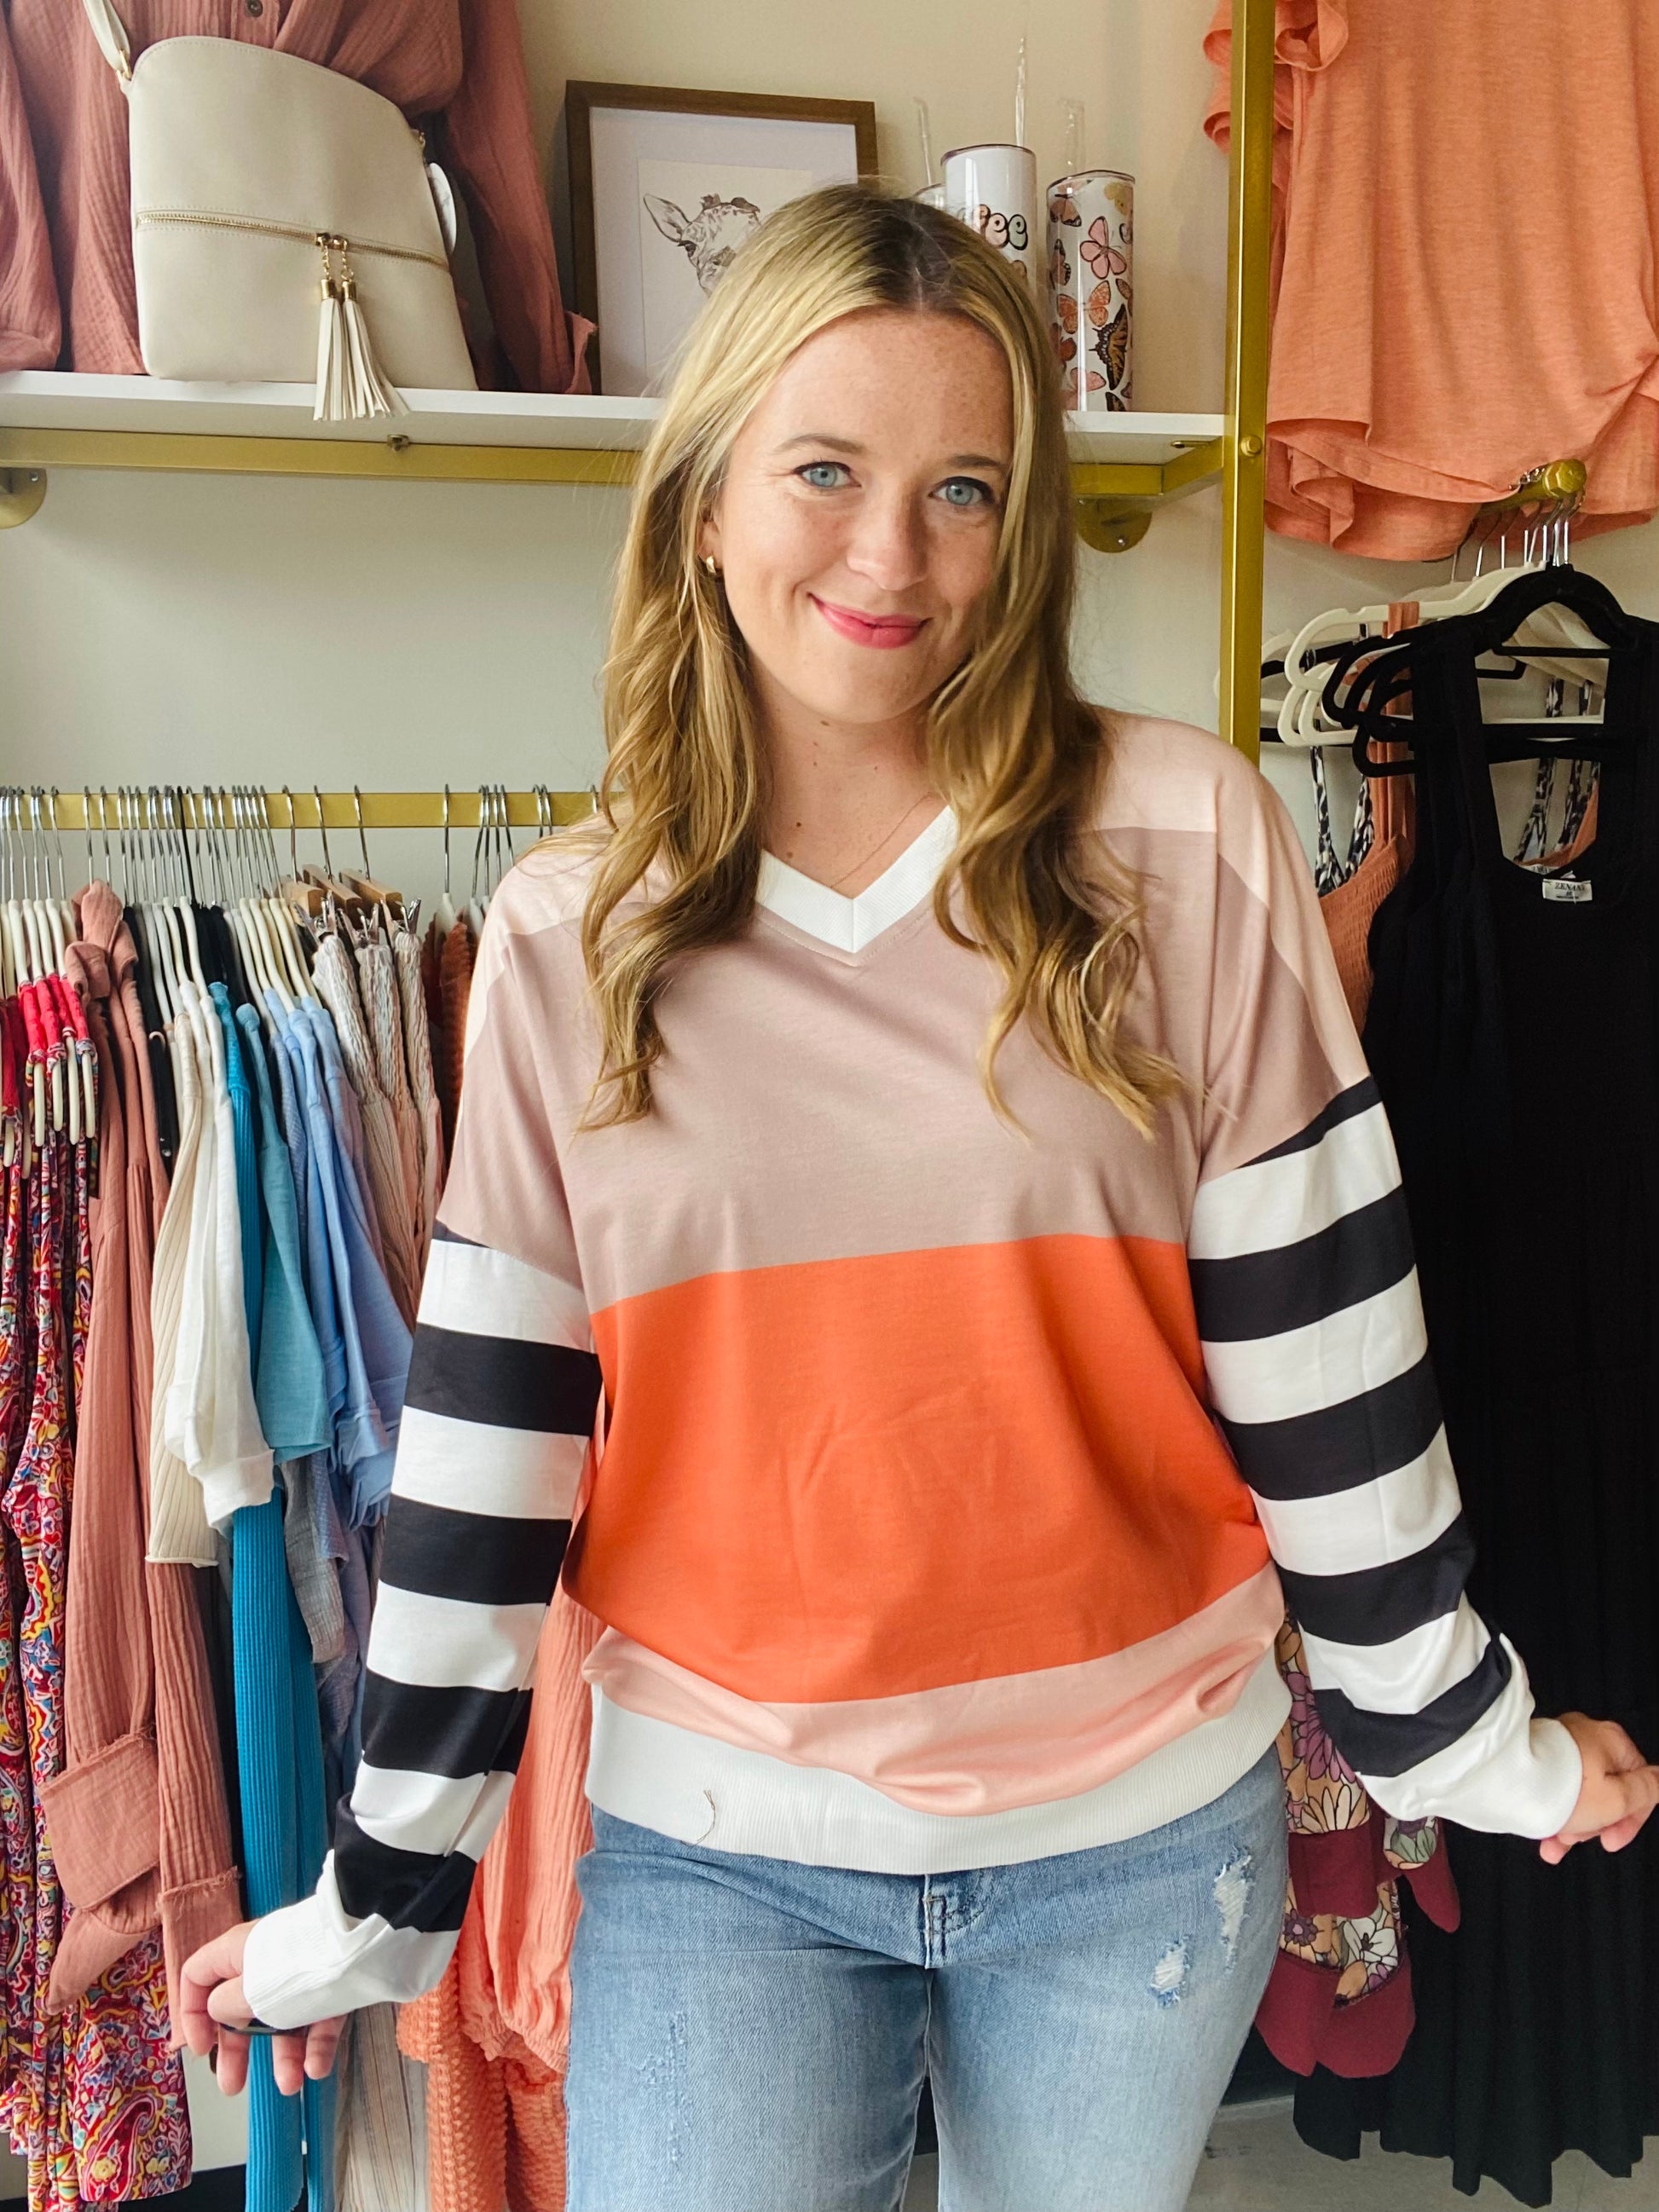 Our lovely Orange Striped Sleeve V Neck is crafted with you in mind. This ultra-soft and comfortable top is the perfect blend of fashion and function. With a V neckline, lightweight and breathable fabric, and colors of fall - you’ll love this stylish colorblock and striped design.